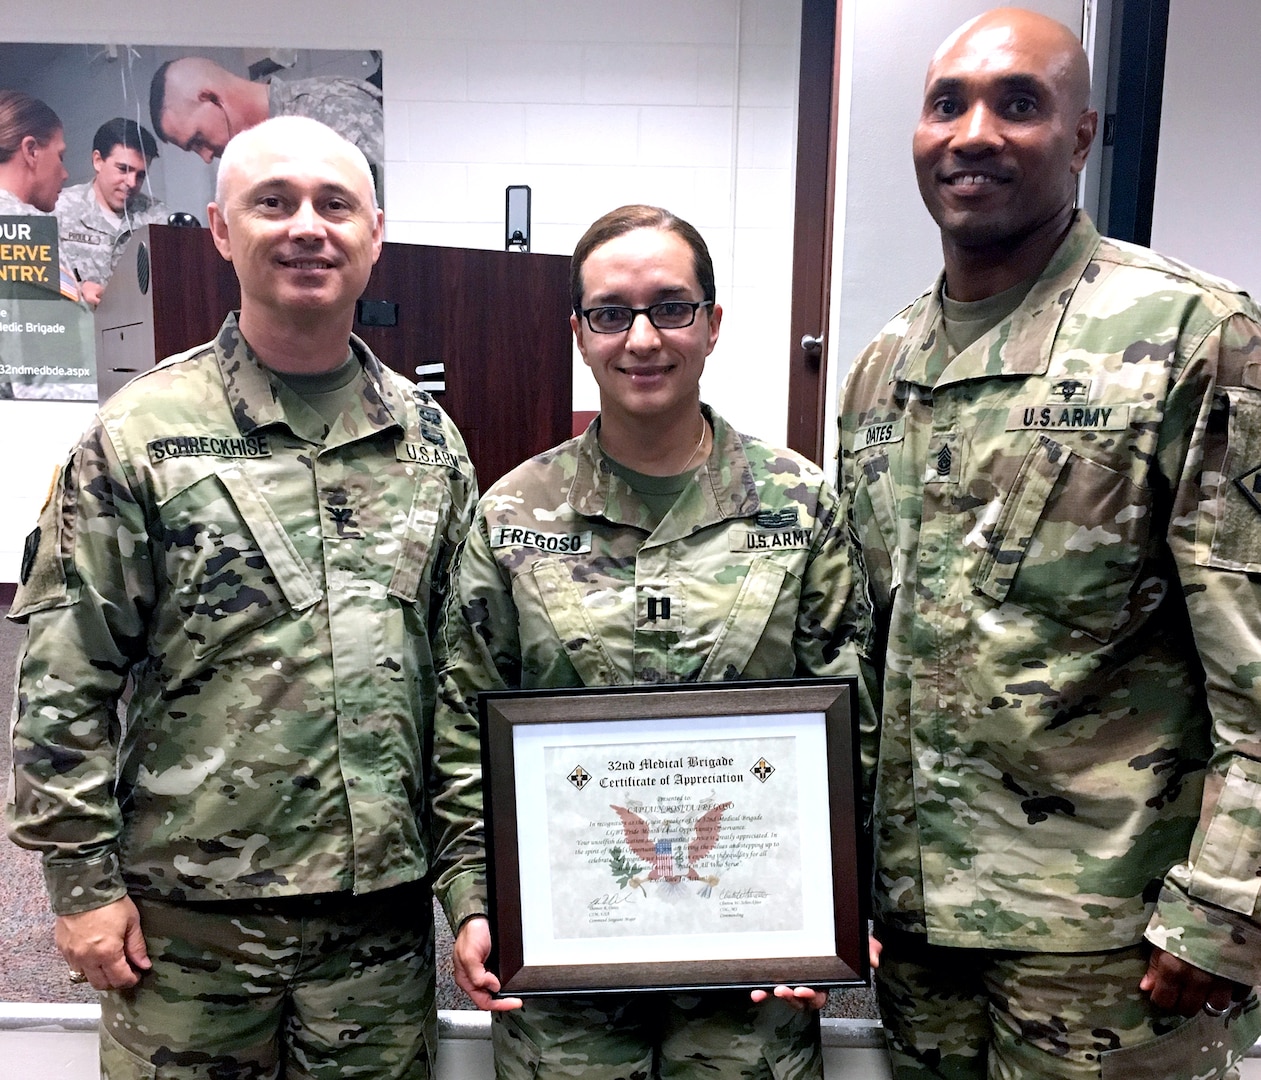 Capt. Rosita Fregoso (center), commander of Company D, 232nd Medical Battalion, accepts a certificate of appreciation for being the guest speaker at the Lesbian, Gay, Bisexual, Transgender, or LGBT, Pride Month Observance June 30, from Col. Clinton W. Schreckhise (left), 32nd Medical Brigade commander, and Command Sgt. Maj. Thomas Oates (right).